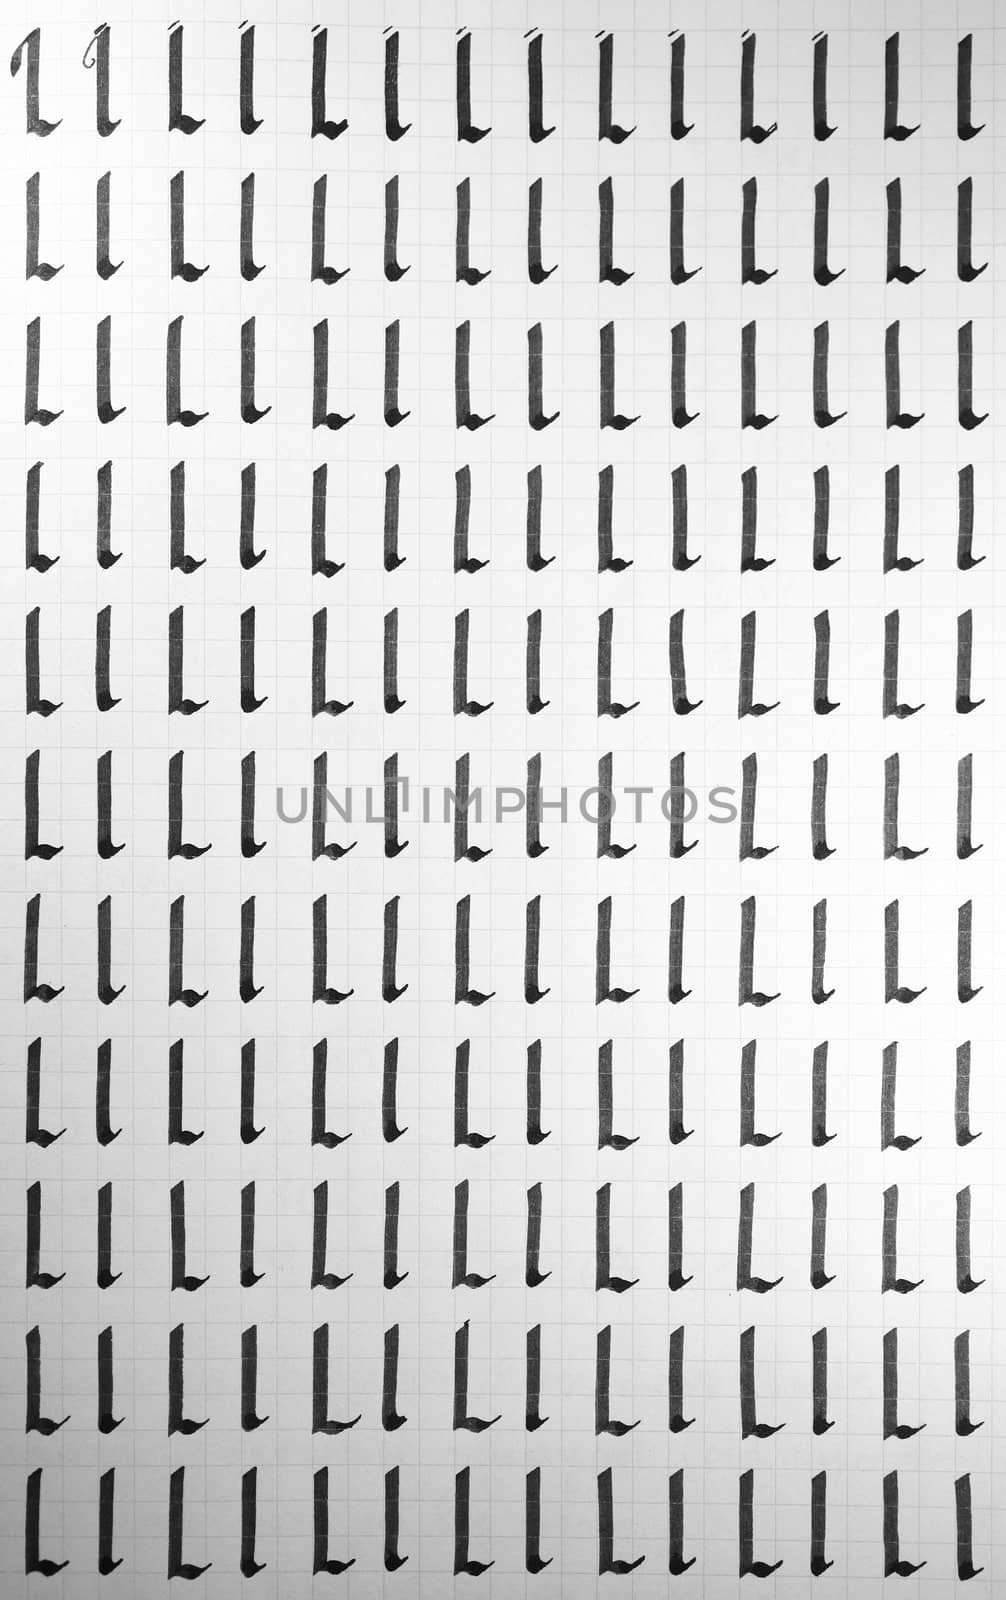 Calligraphy black and white letters L background. Lettering practice writing worksheet. Handwriting symbol filling pattern. Calligraphic letter l learning skills paper page.